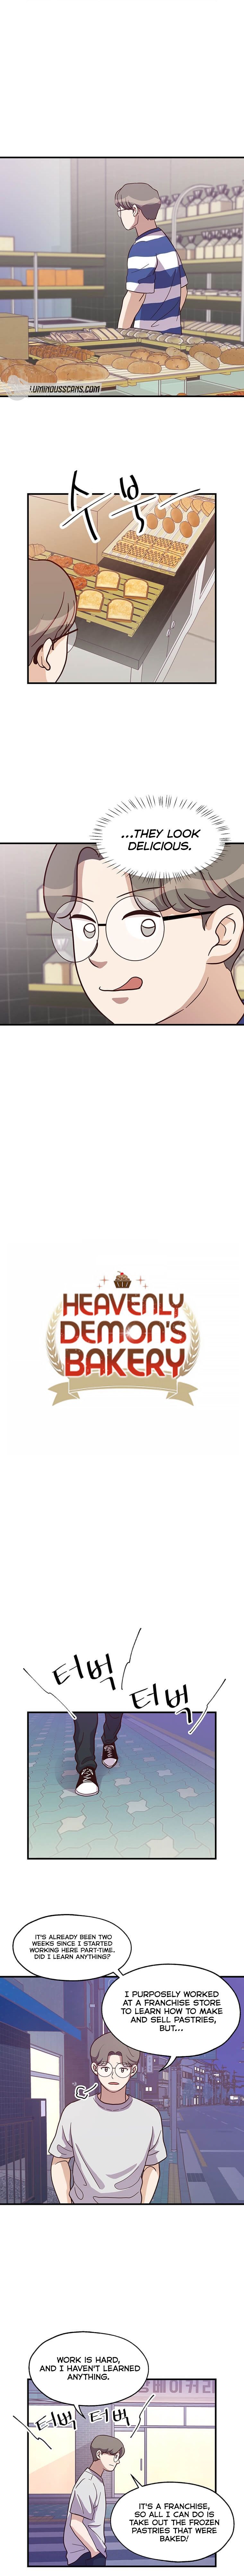 Heavenly Demon Bakery - Page 2